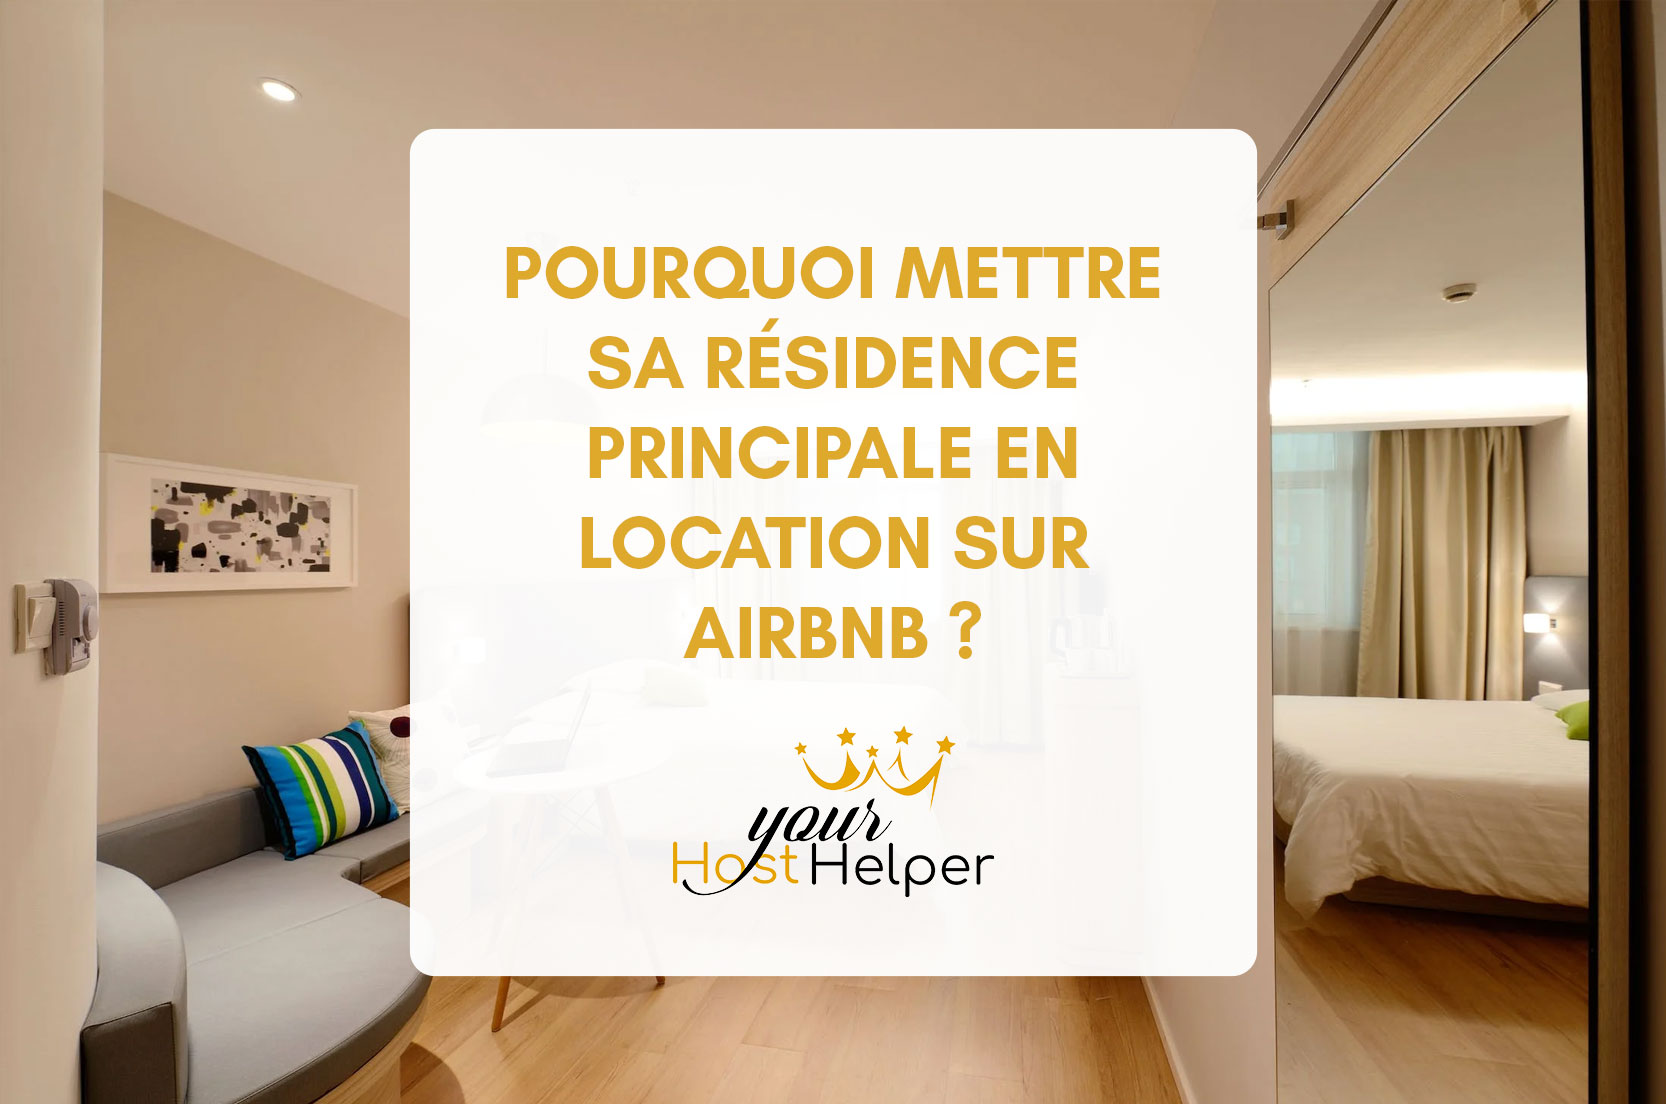 You are currently viewing Pourquoi mettre sa résidence principale en location sur Airbnb ?